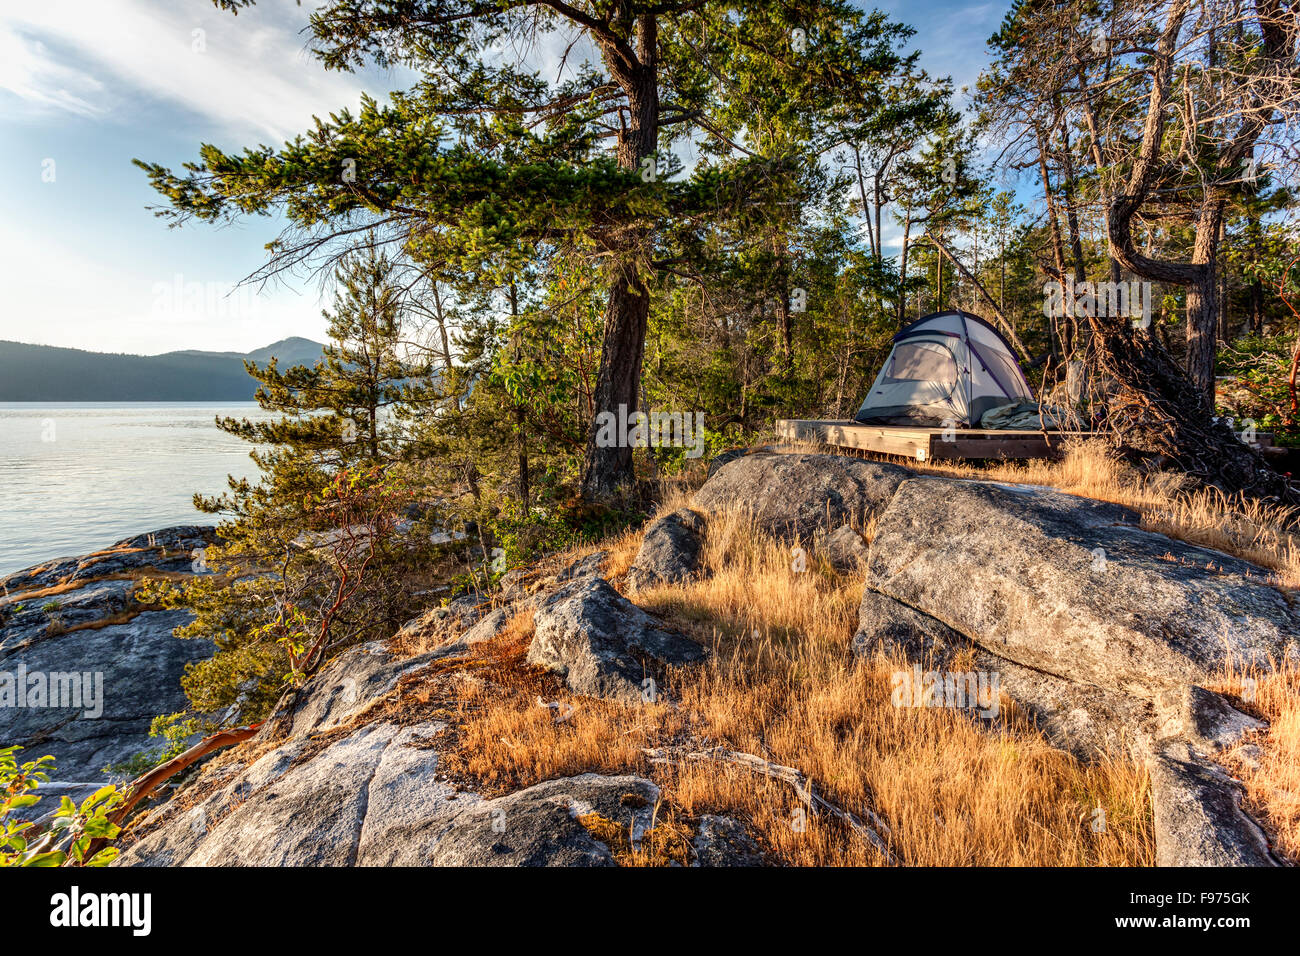 The sun sets on a kayaker's tent on West Curme Island in Desolation Sound Marine Park, British Columbia, Canada. Stock Photo